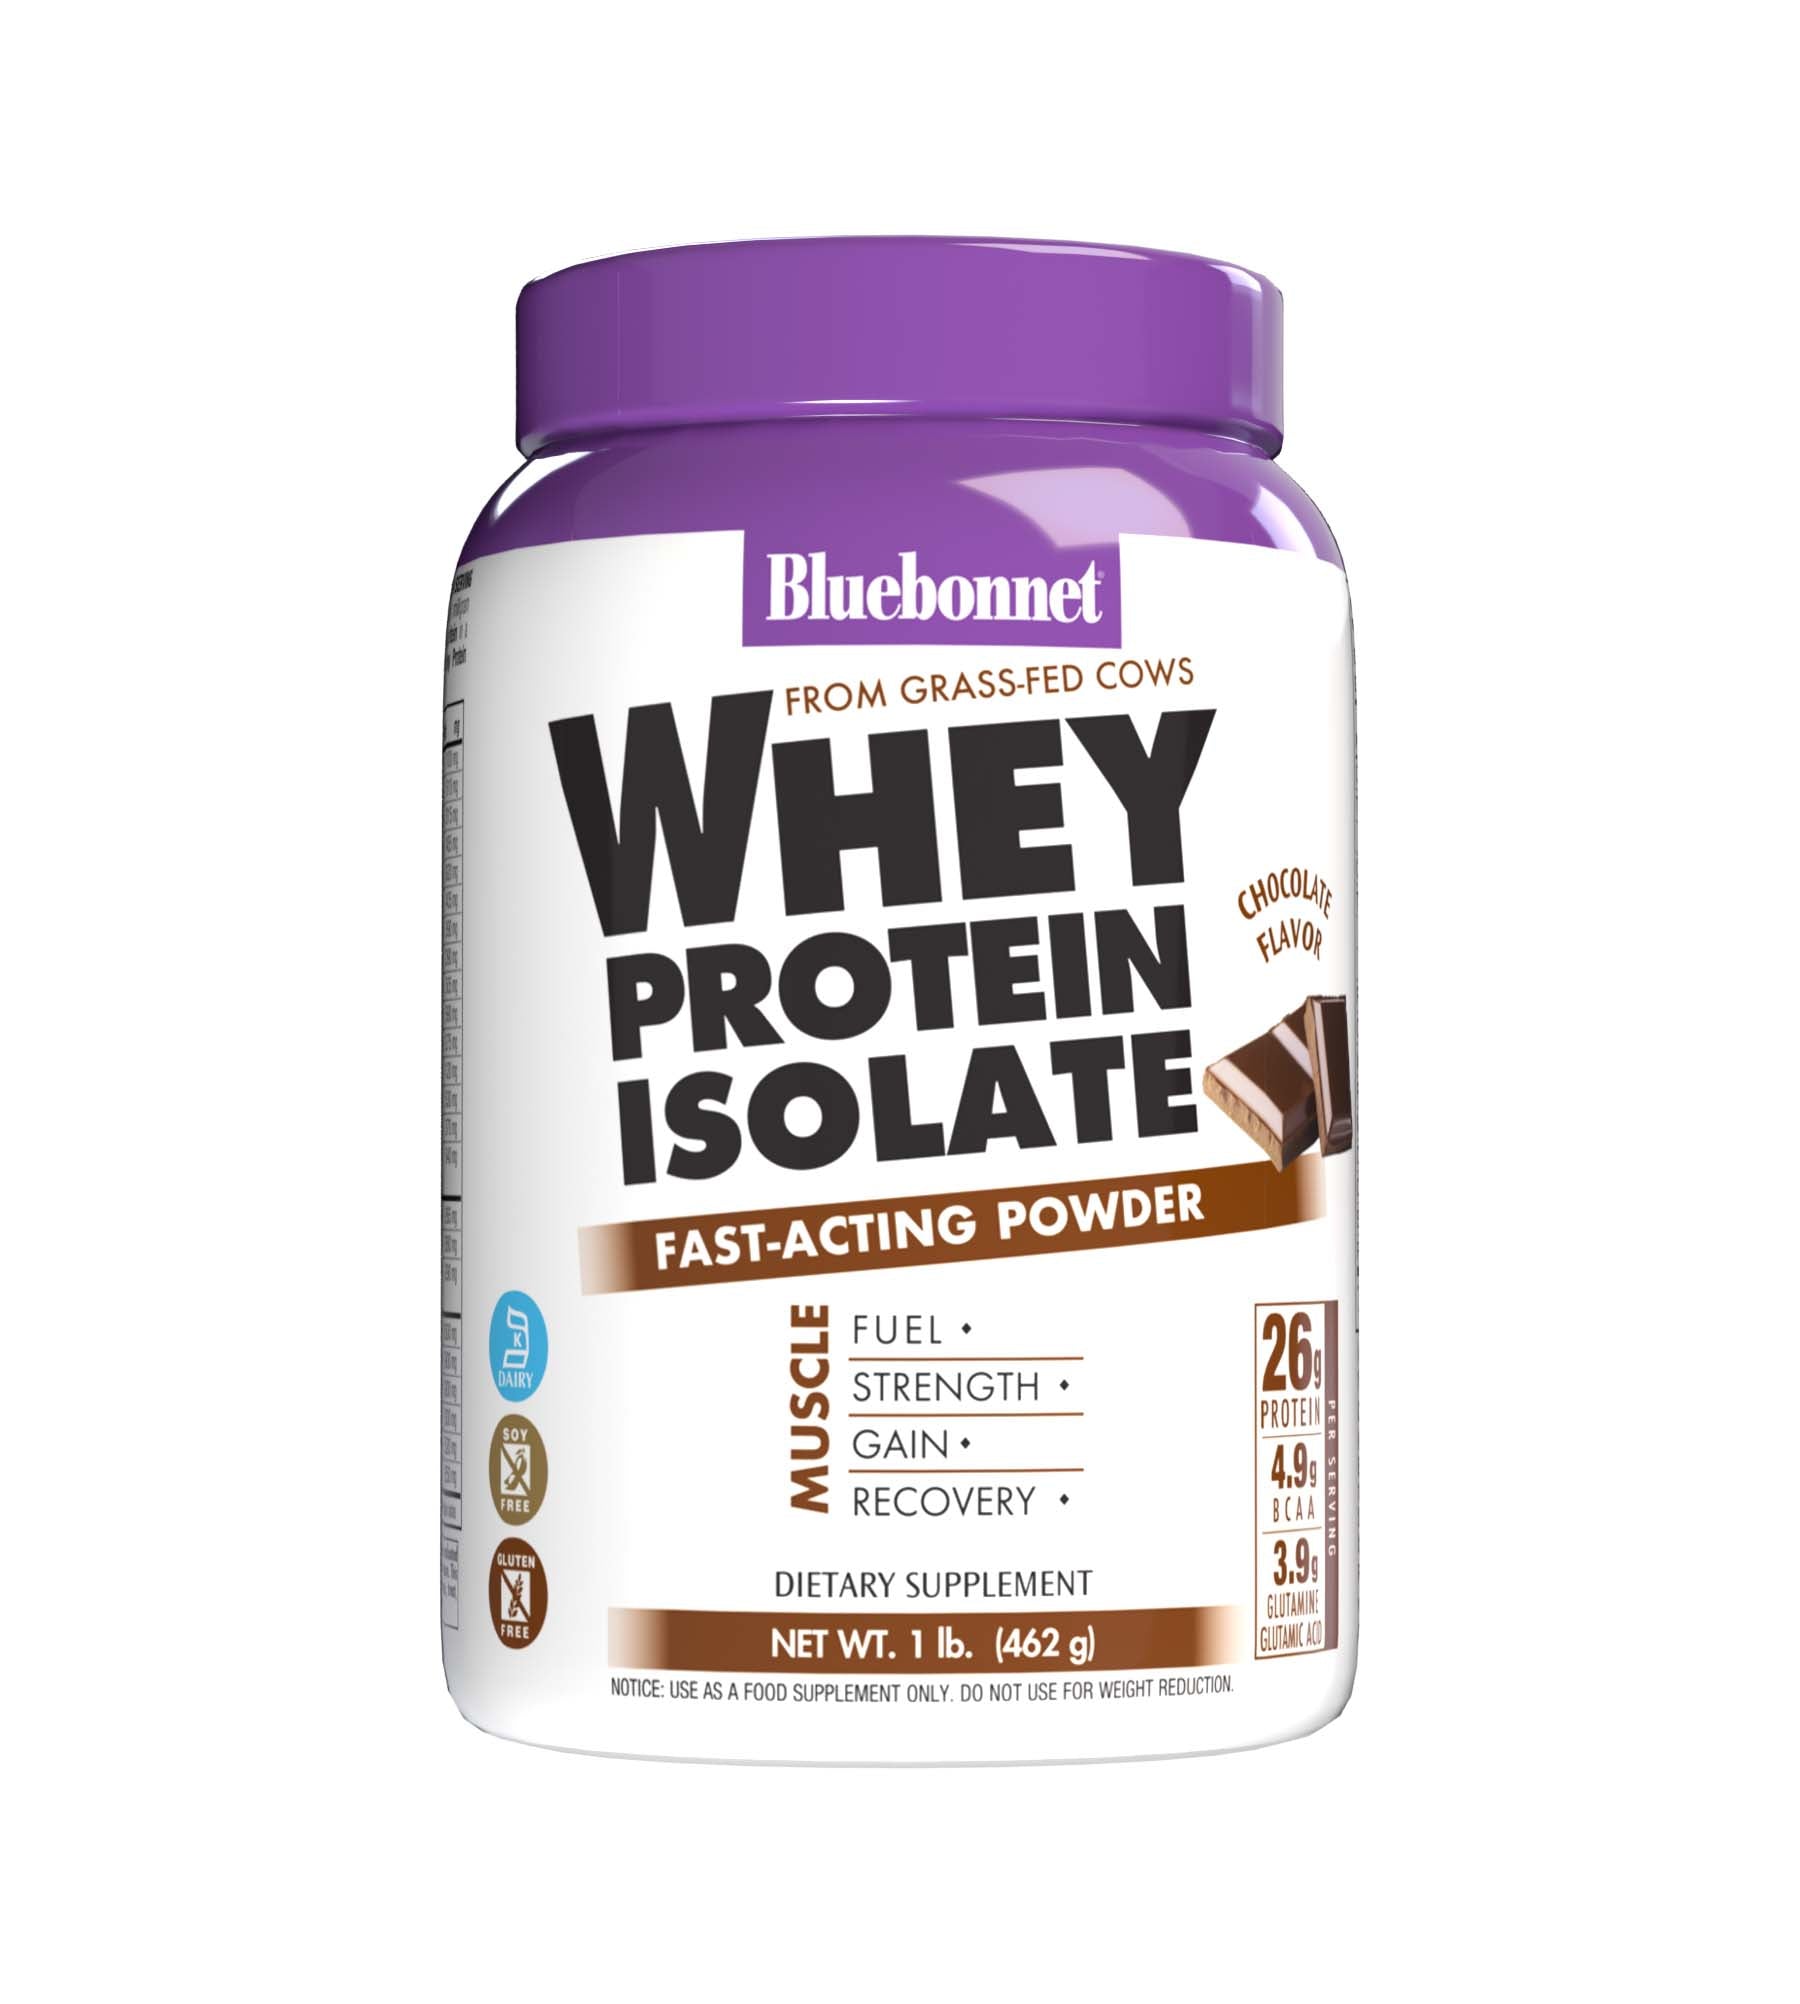 Bluebonnet's Whey Protein Isolate Powder. Chocolate flavor. 26 g of protein, 4.9 g BCAA and 3.9 g Glutamine Glutamic Acid per serving. #size_1 lb